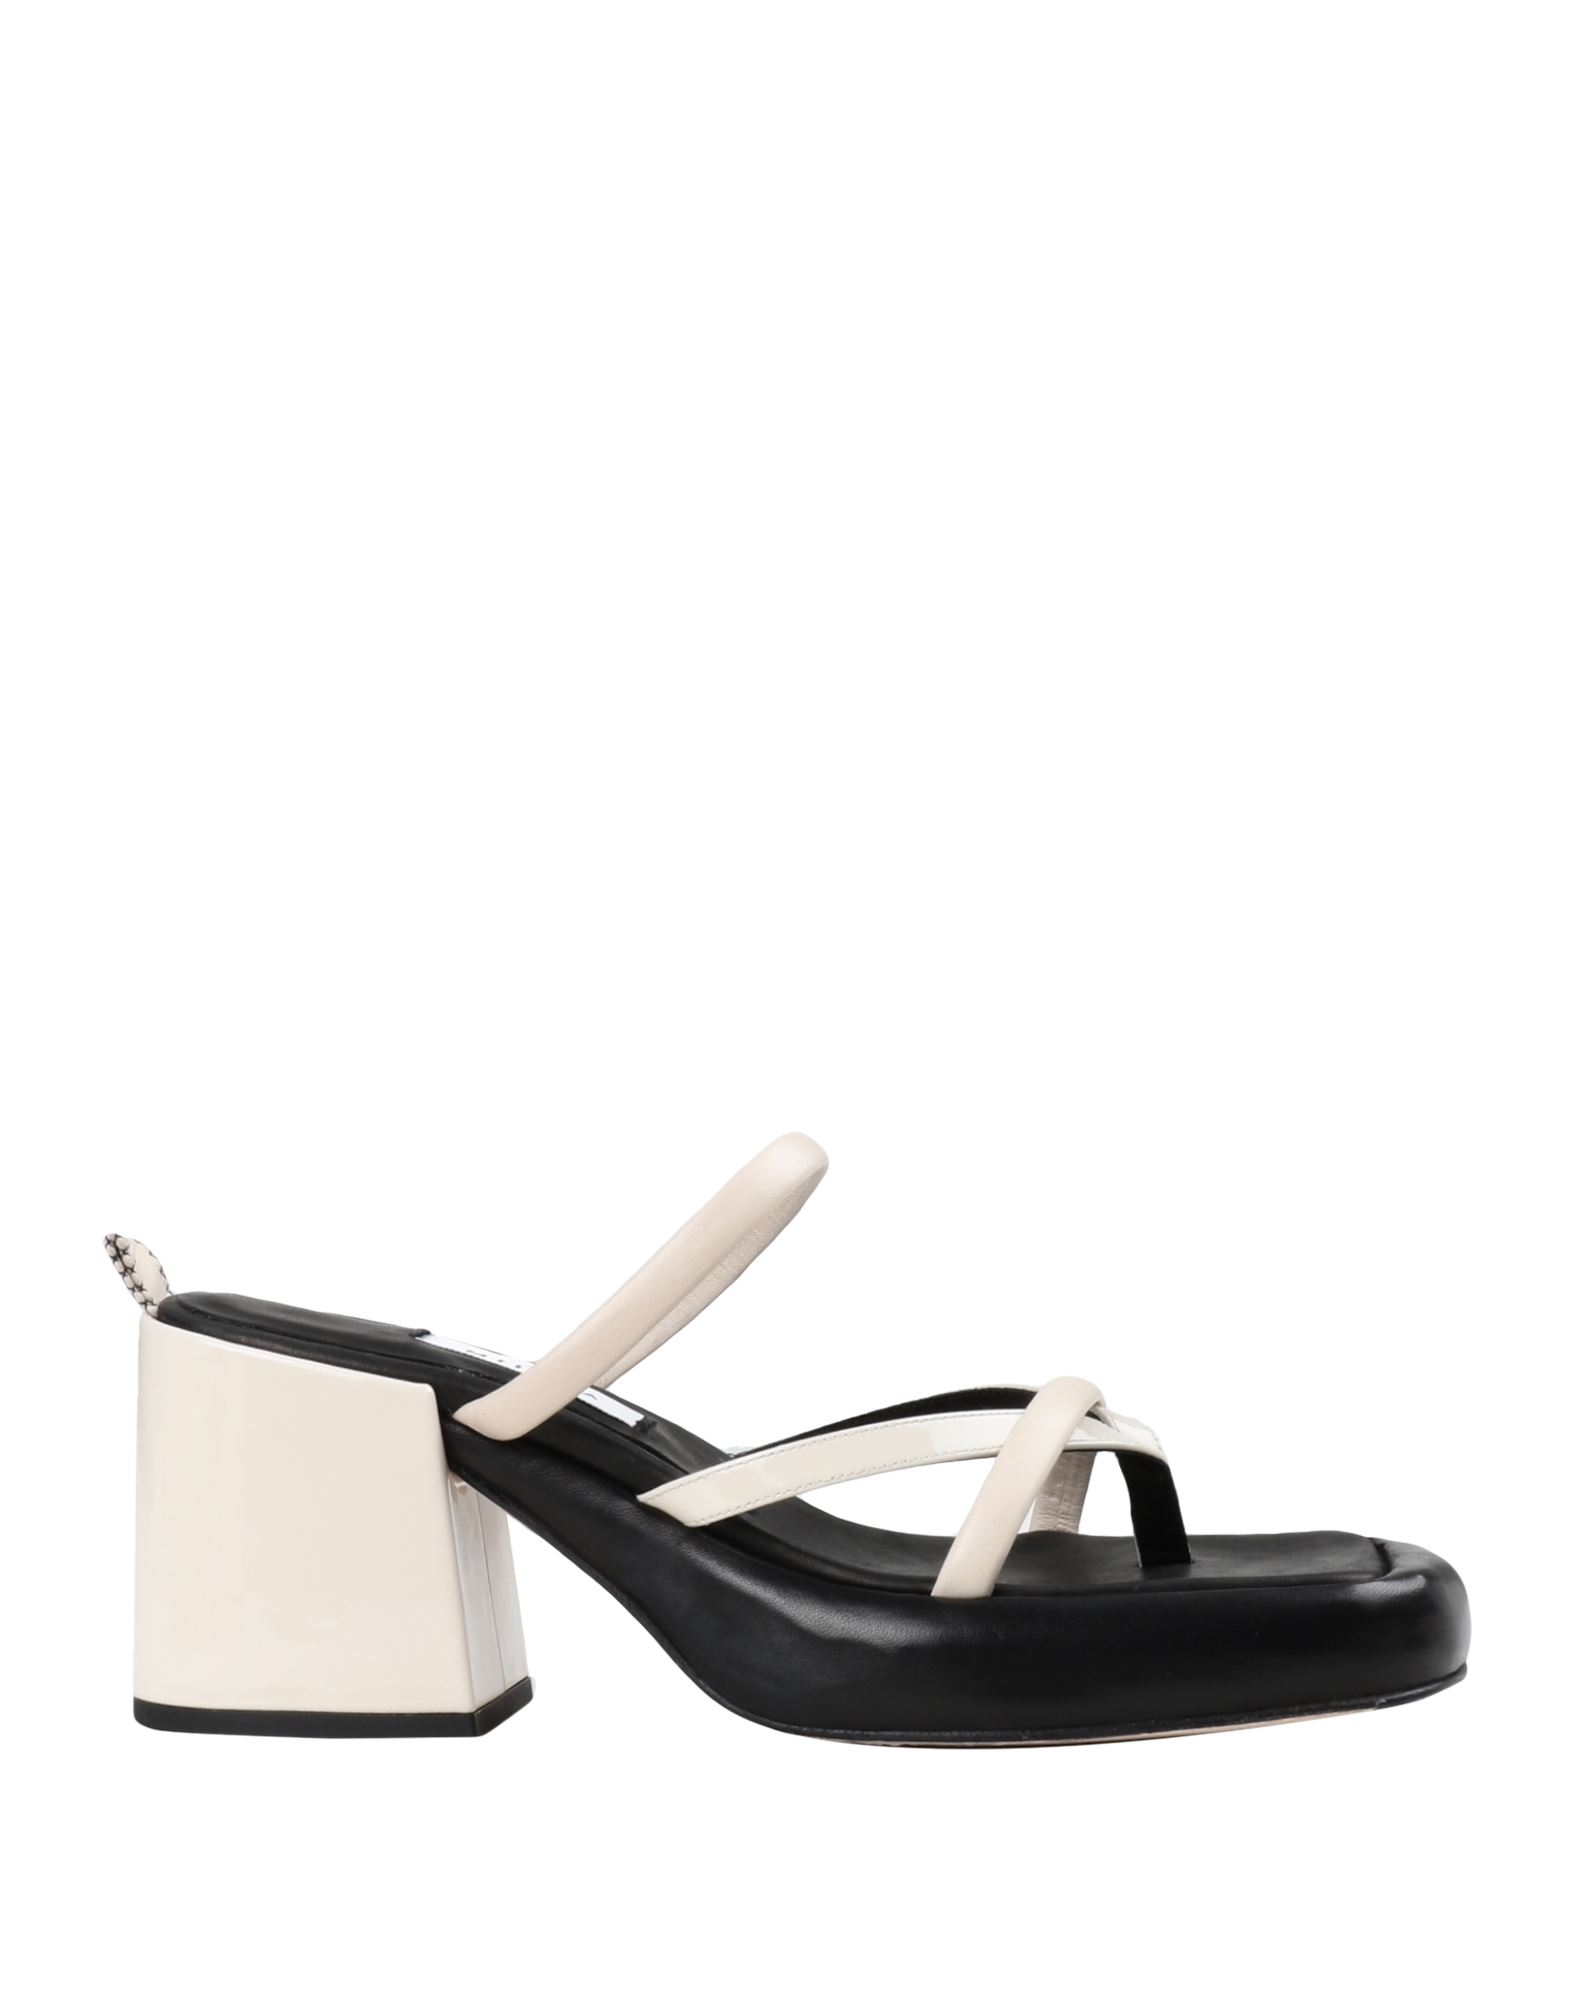 Miista Toe Strap Sandals In Black And White